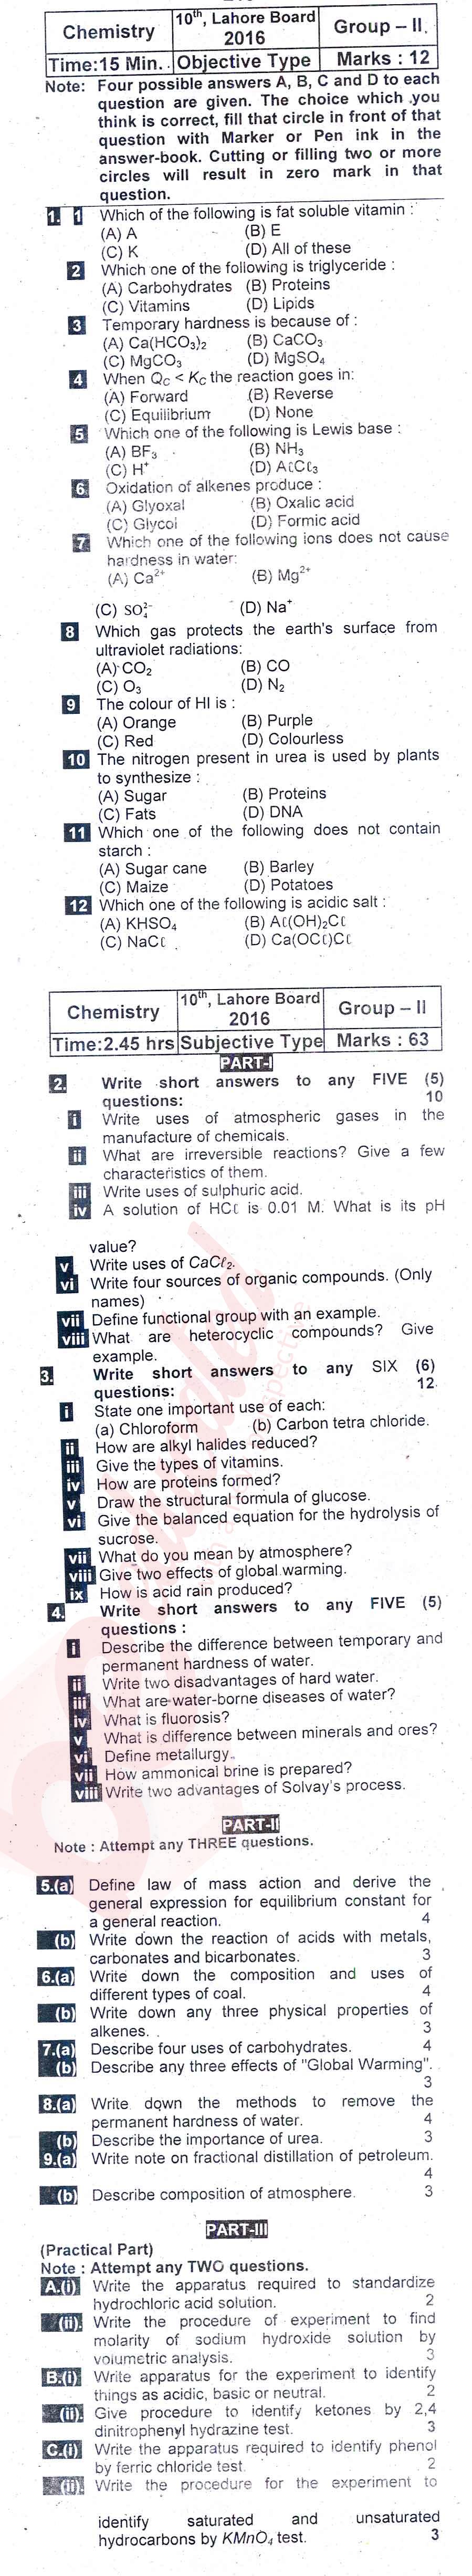 Chemistry 10th English Medium Past Paper Group 2 BISE Lahore 2016